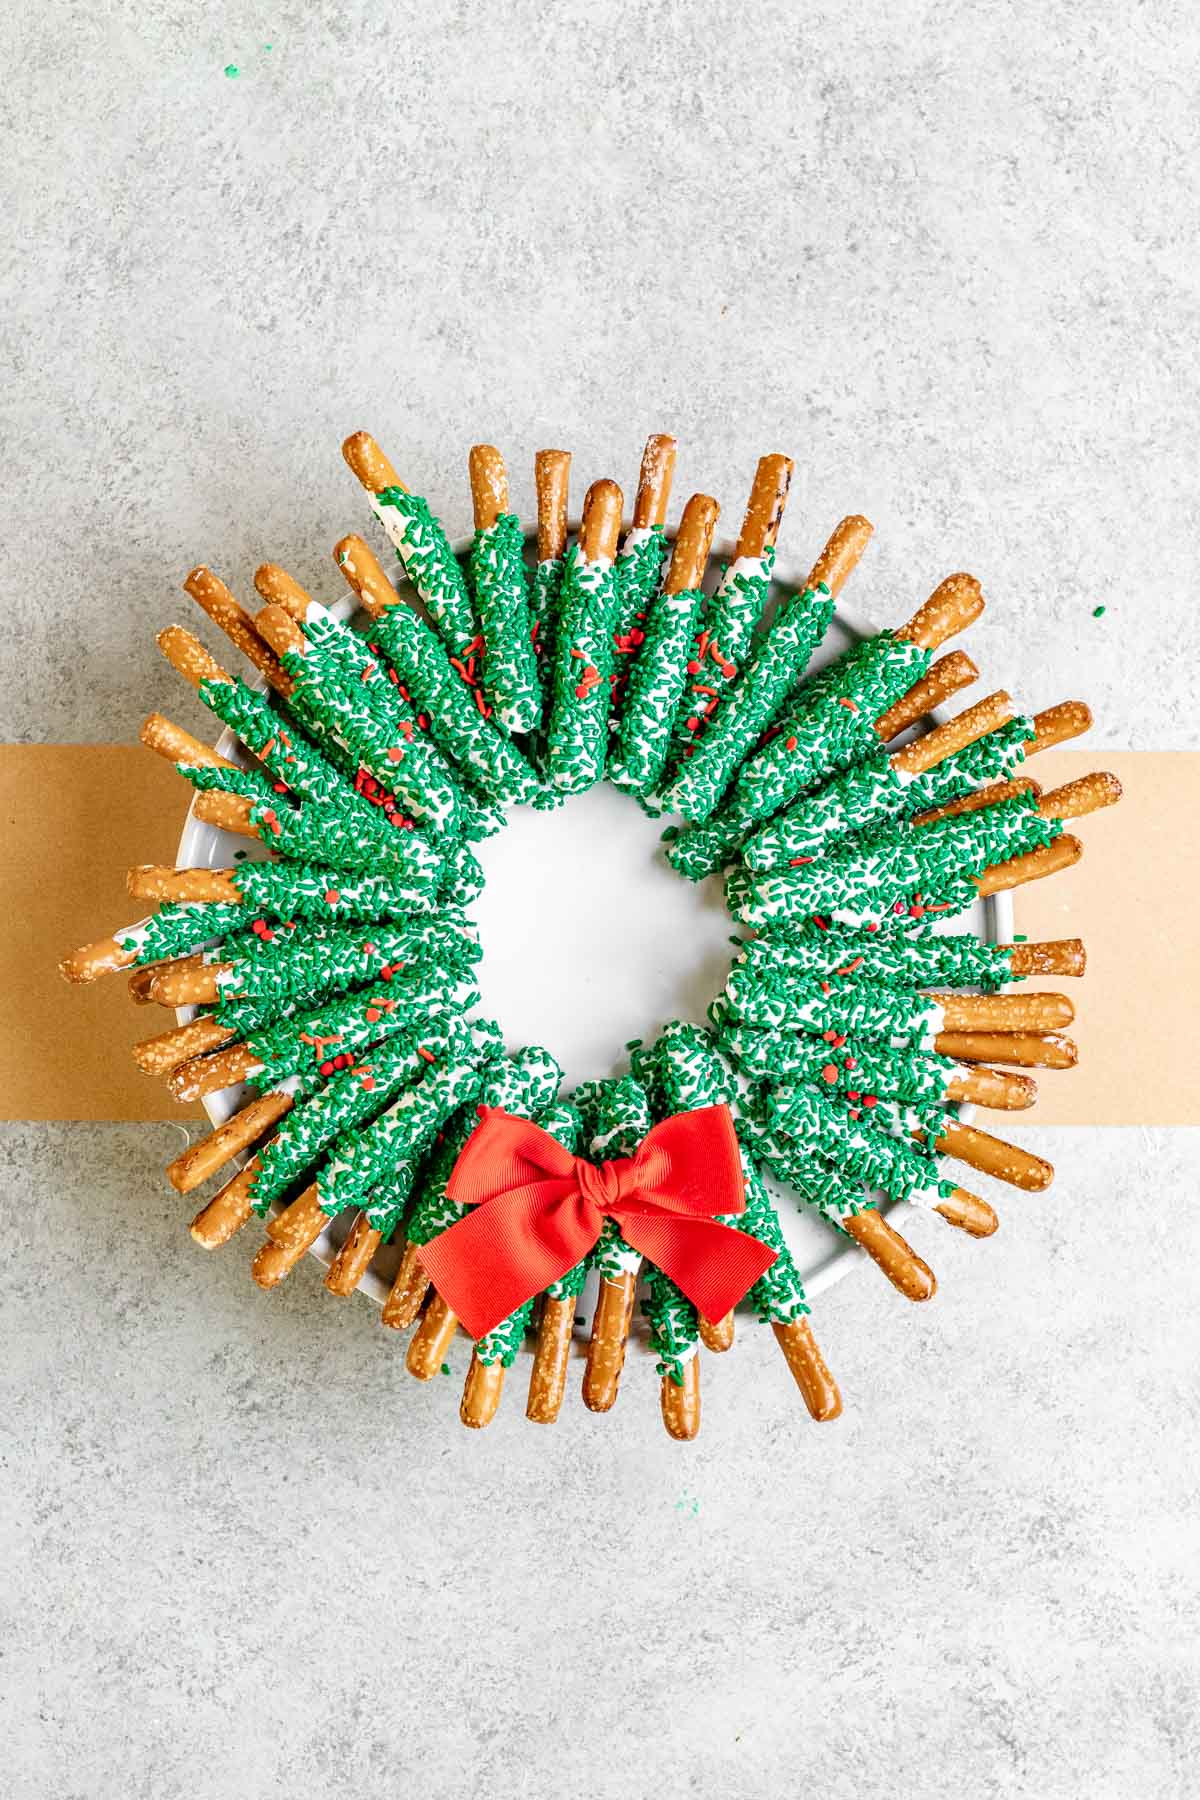 Chocolate Pretzel Wreath white chocolate coated pretzel sticks with green sanding sugar arranged as a wreath with a red bow